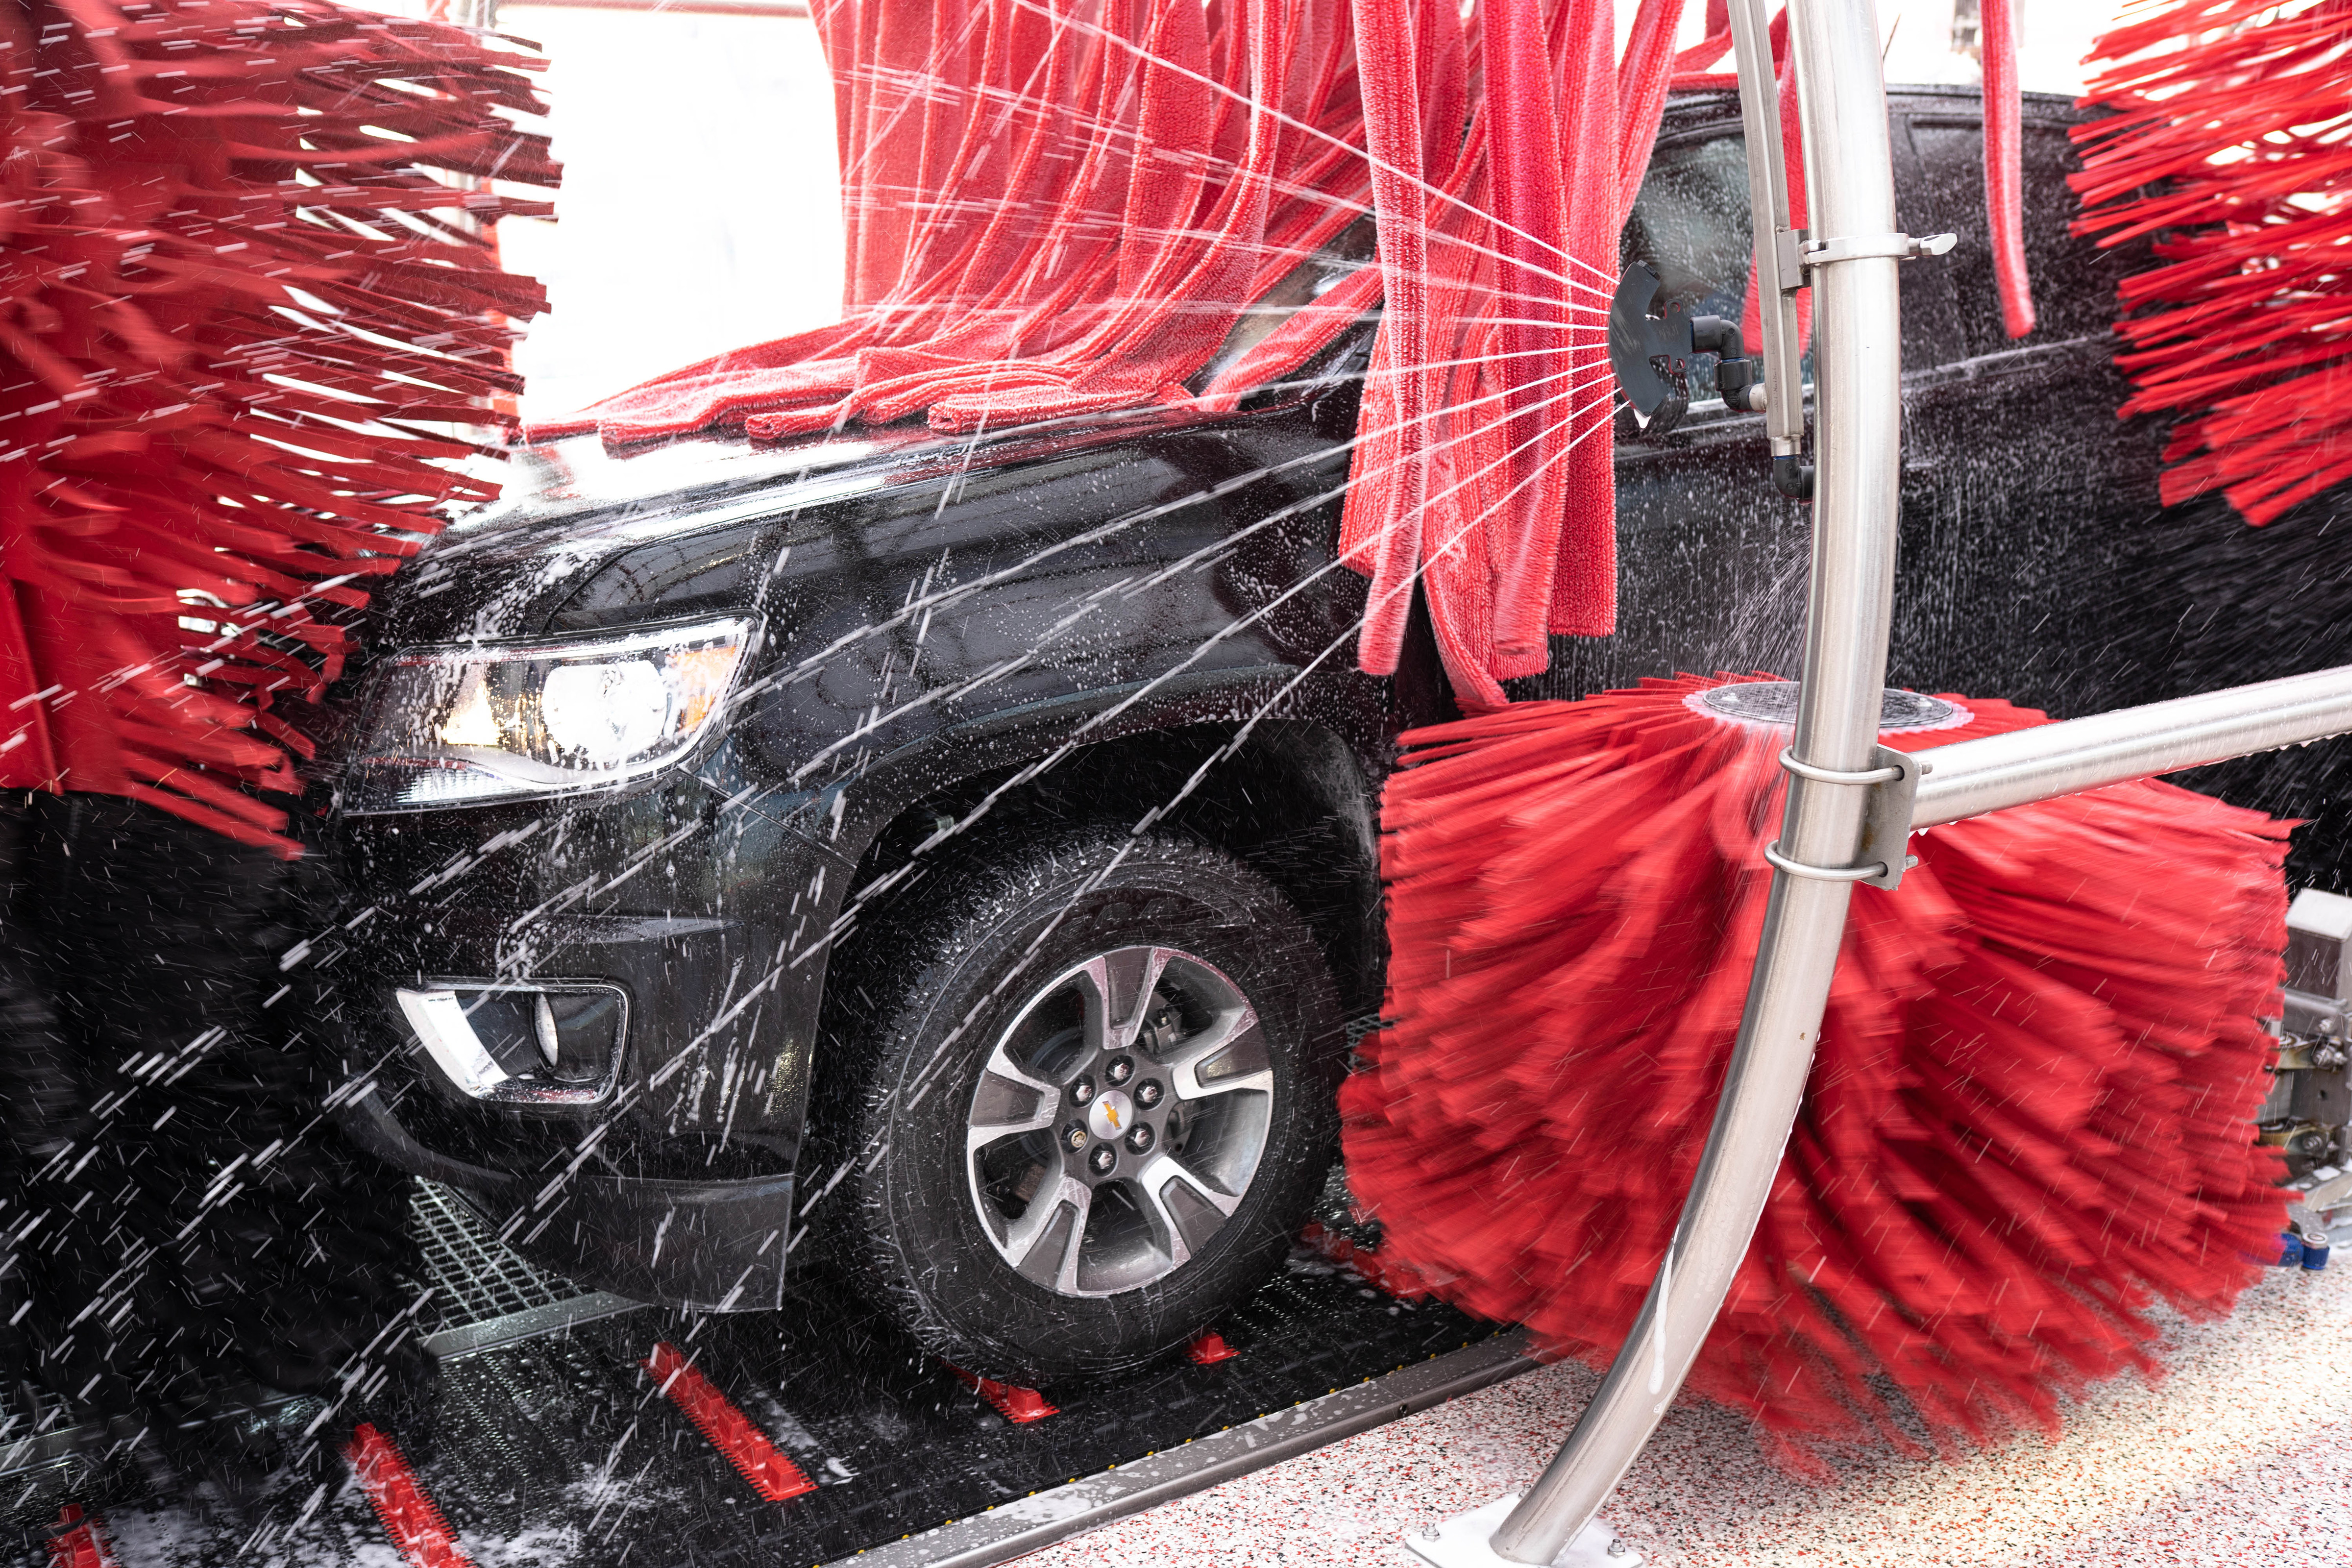 Image 9 | Tommy's Express® Car Wash